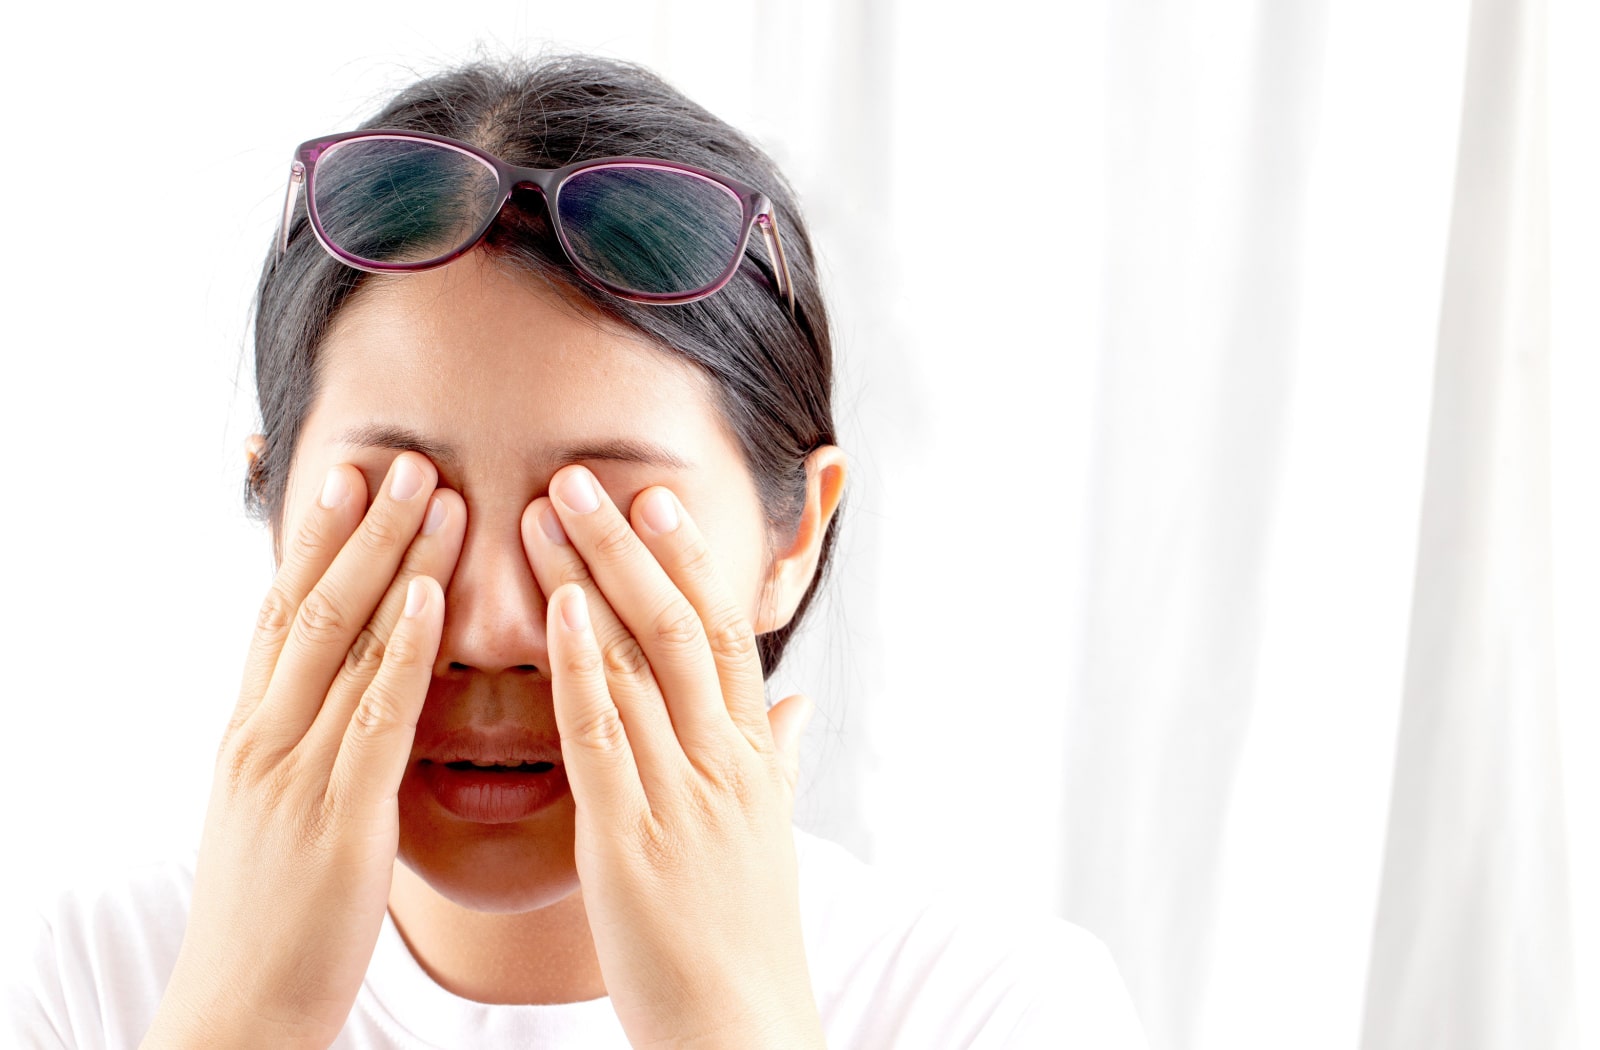 A woman massaging her eyes, suffering from blurry, poor vision